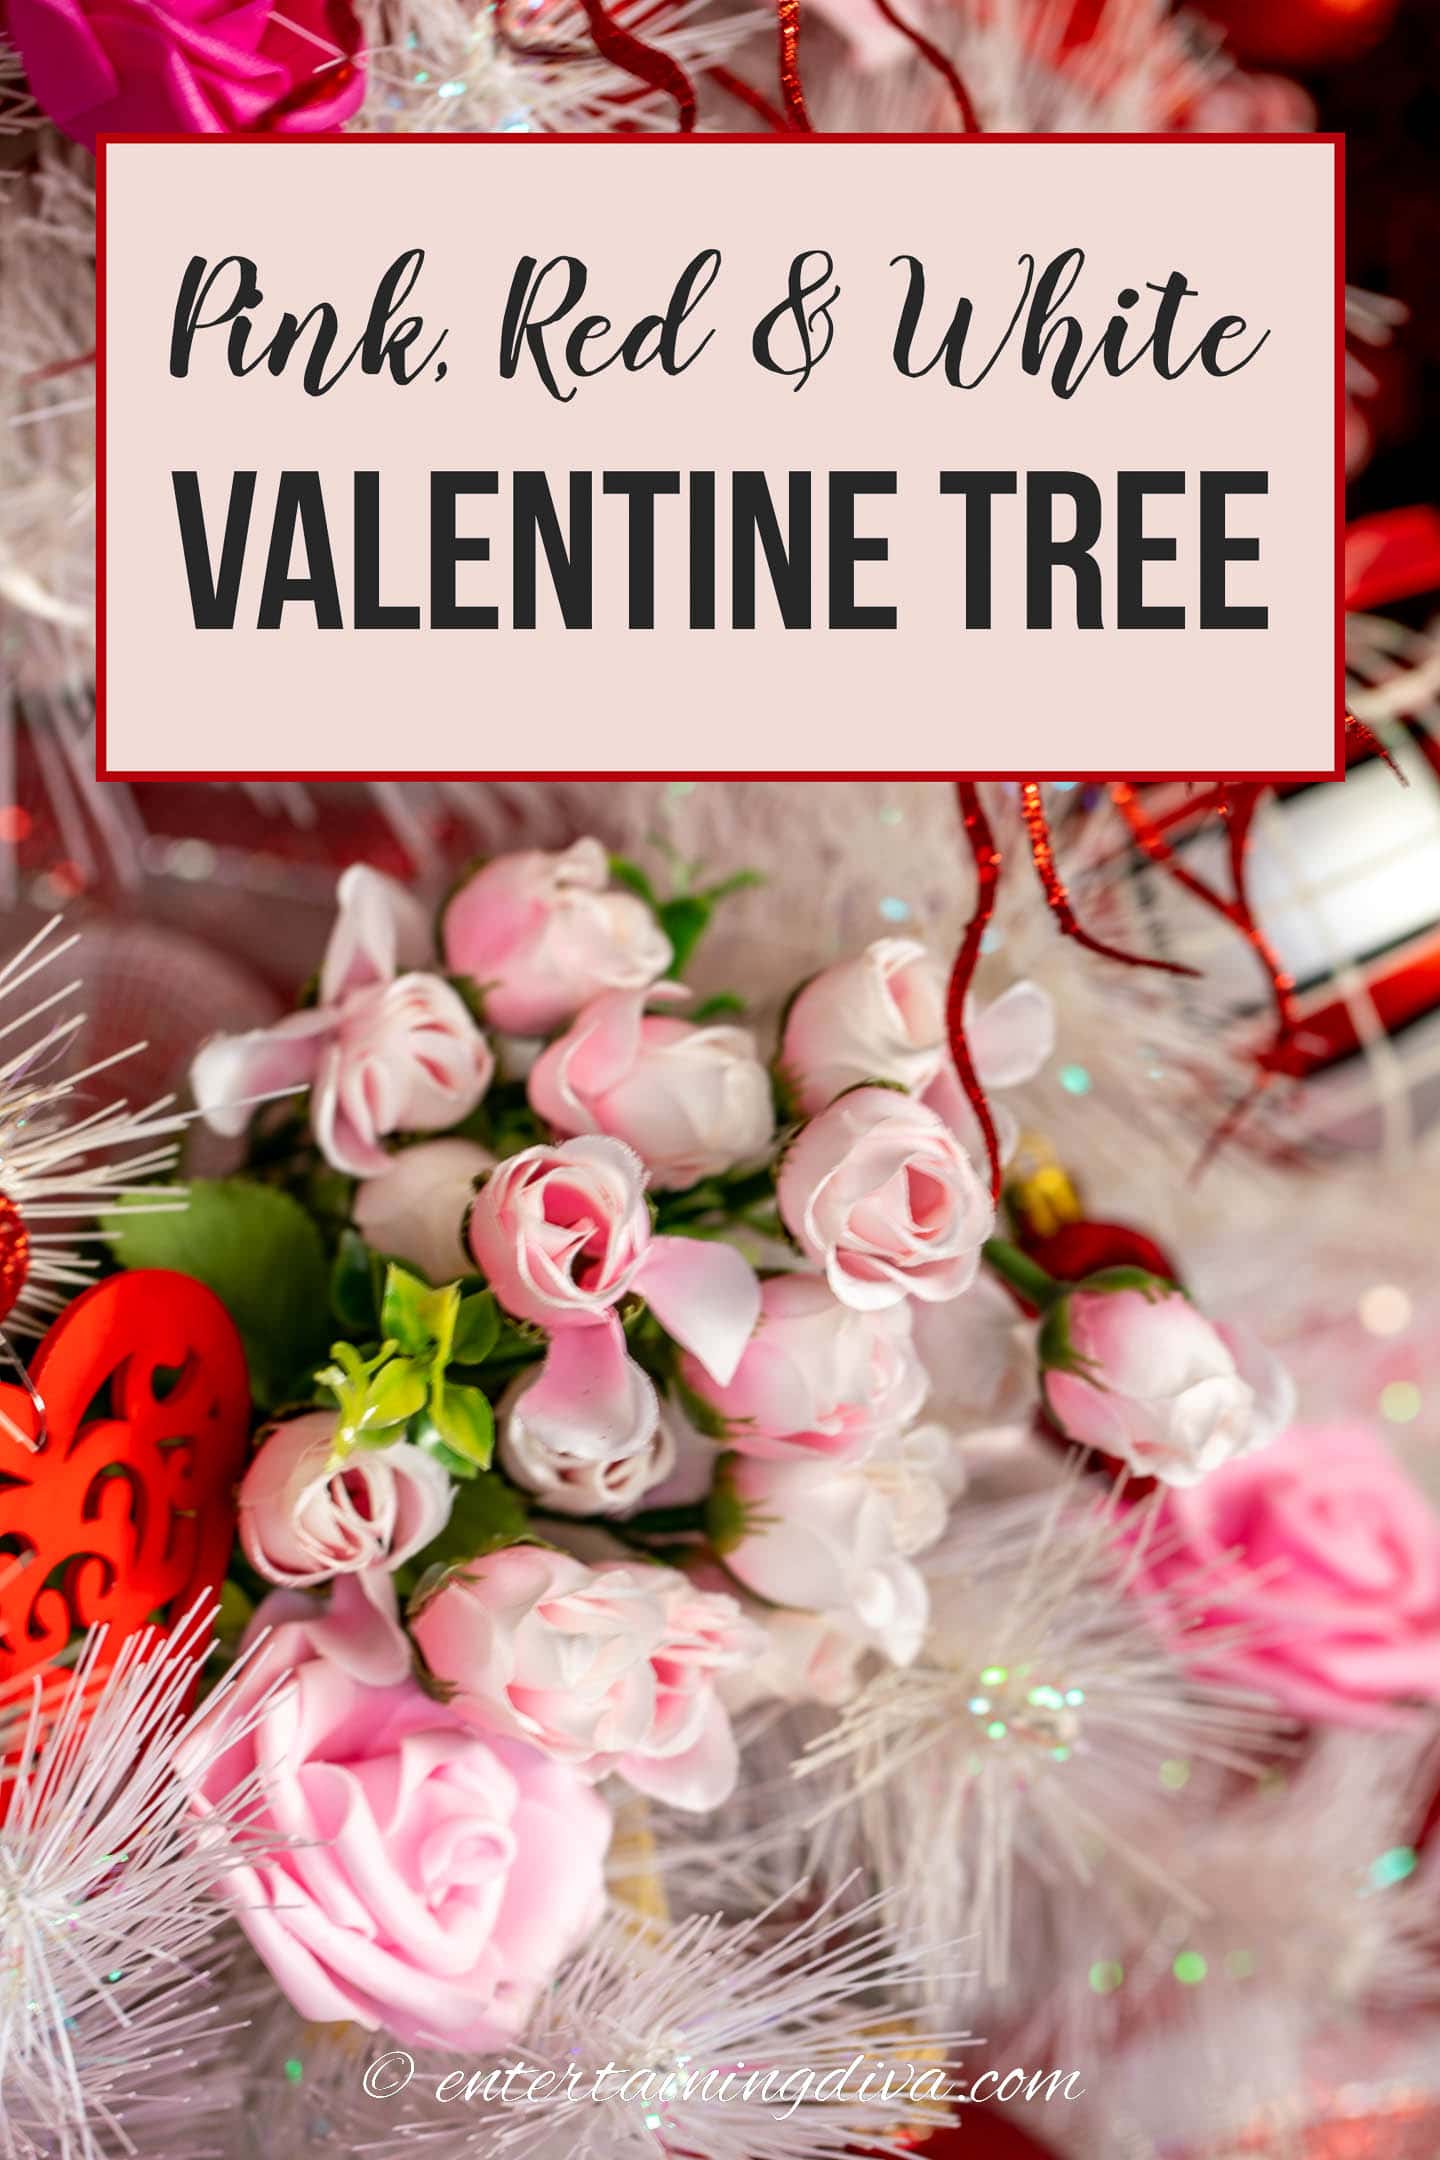 Pink, red and white Valentine tree